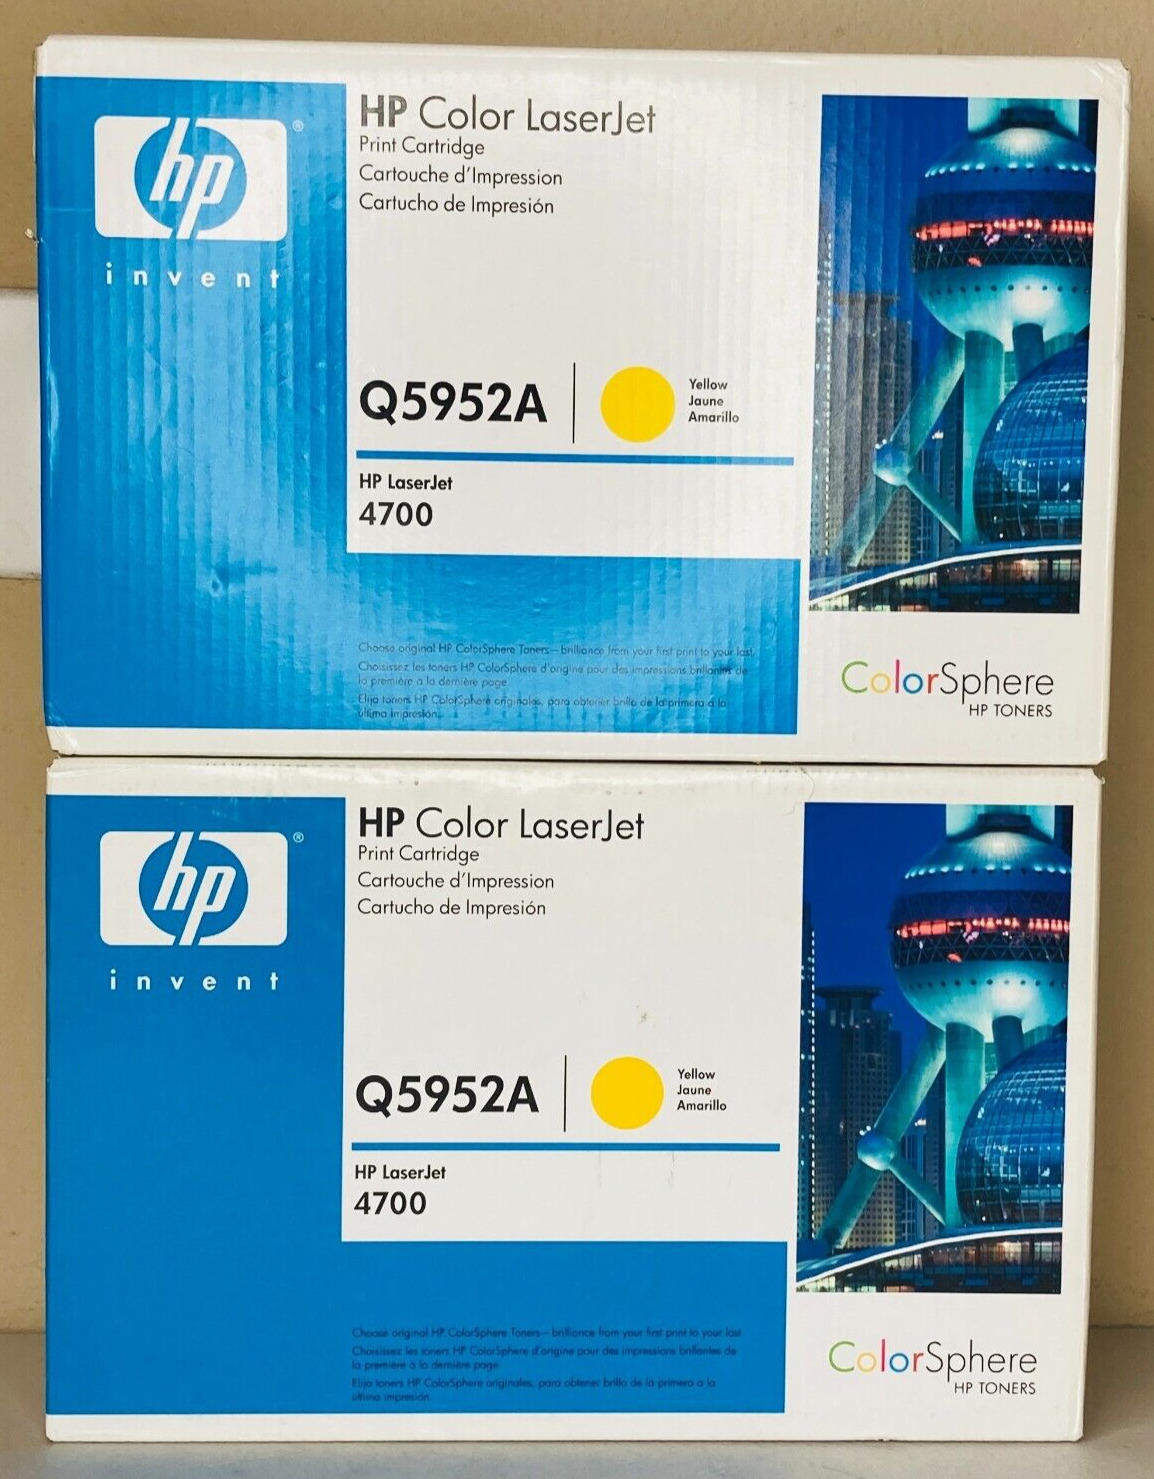 LOT OF 2 HP COLOR LASERJET PRINT CARTRIDGES Q5952A Yellow for 4700